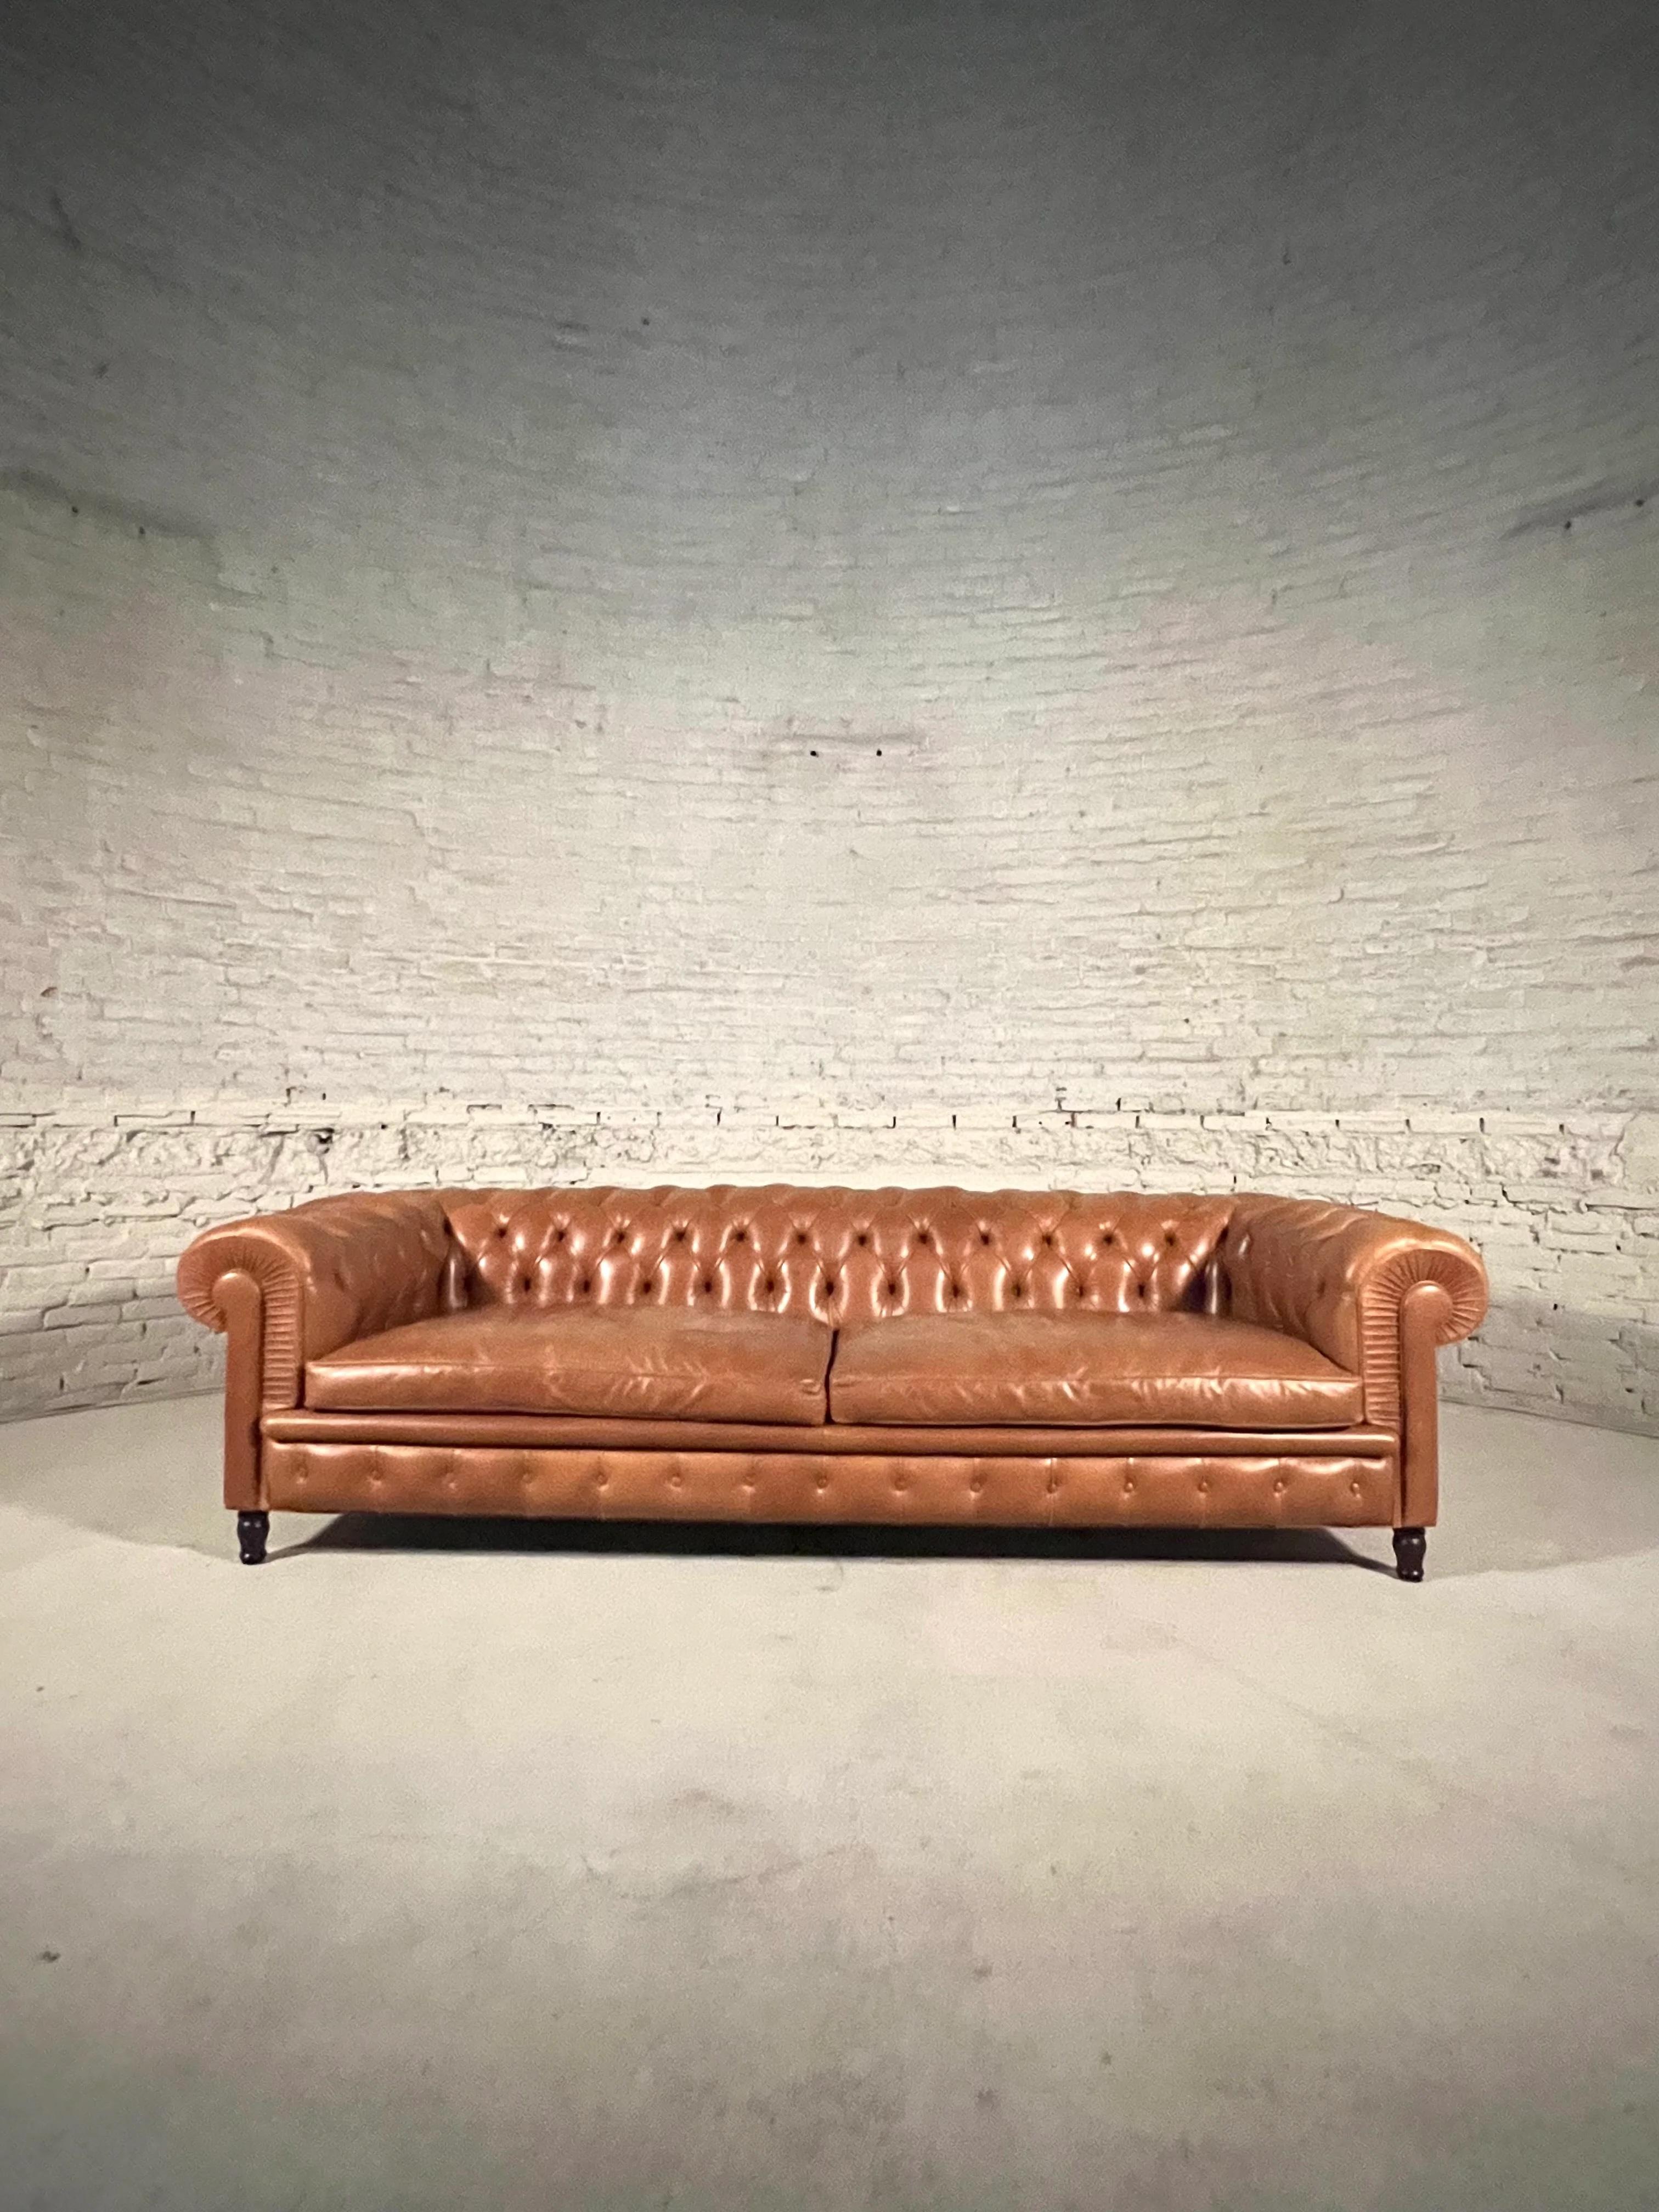 A prestigious and exclusive reissue of a grand historic. The four-seater sofa, an elegant and generously-proportioned reinterpretation of one of the most iconic pieces from the Poltrona Frau Archives, the artisan mastery and zest for perfection,